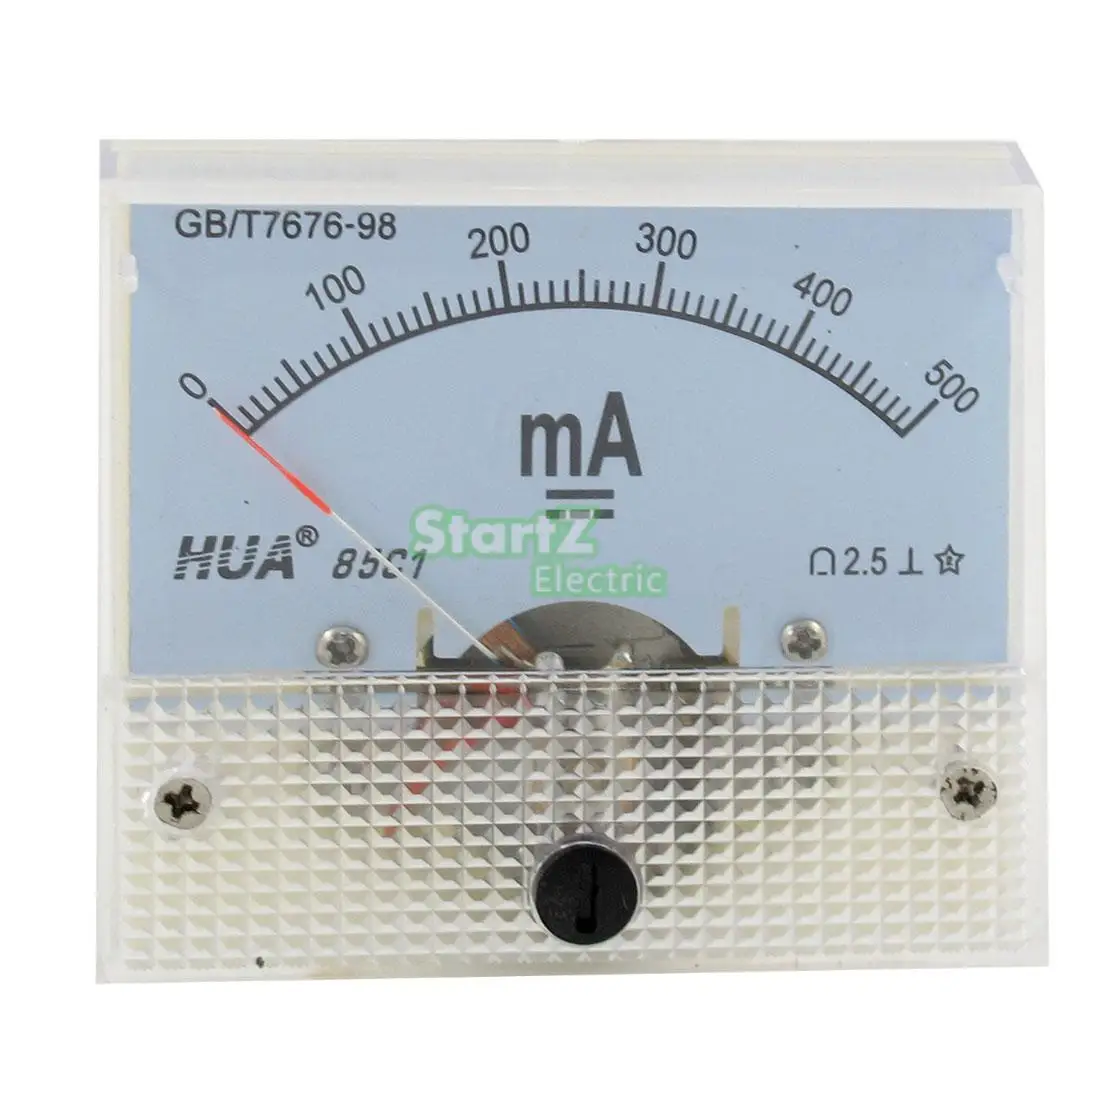 Analog Amp Panel Meter Current Ammeter DC 0-100mA 100mA